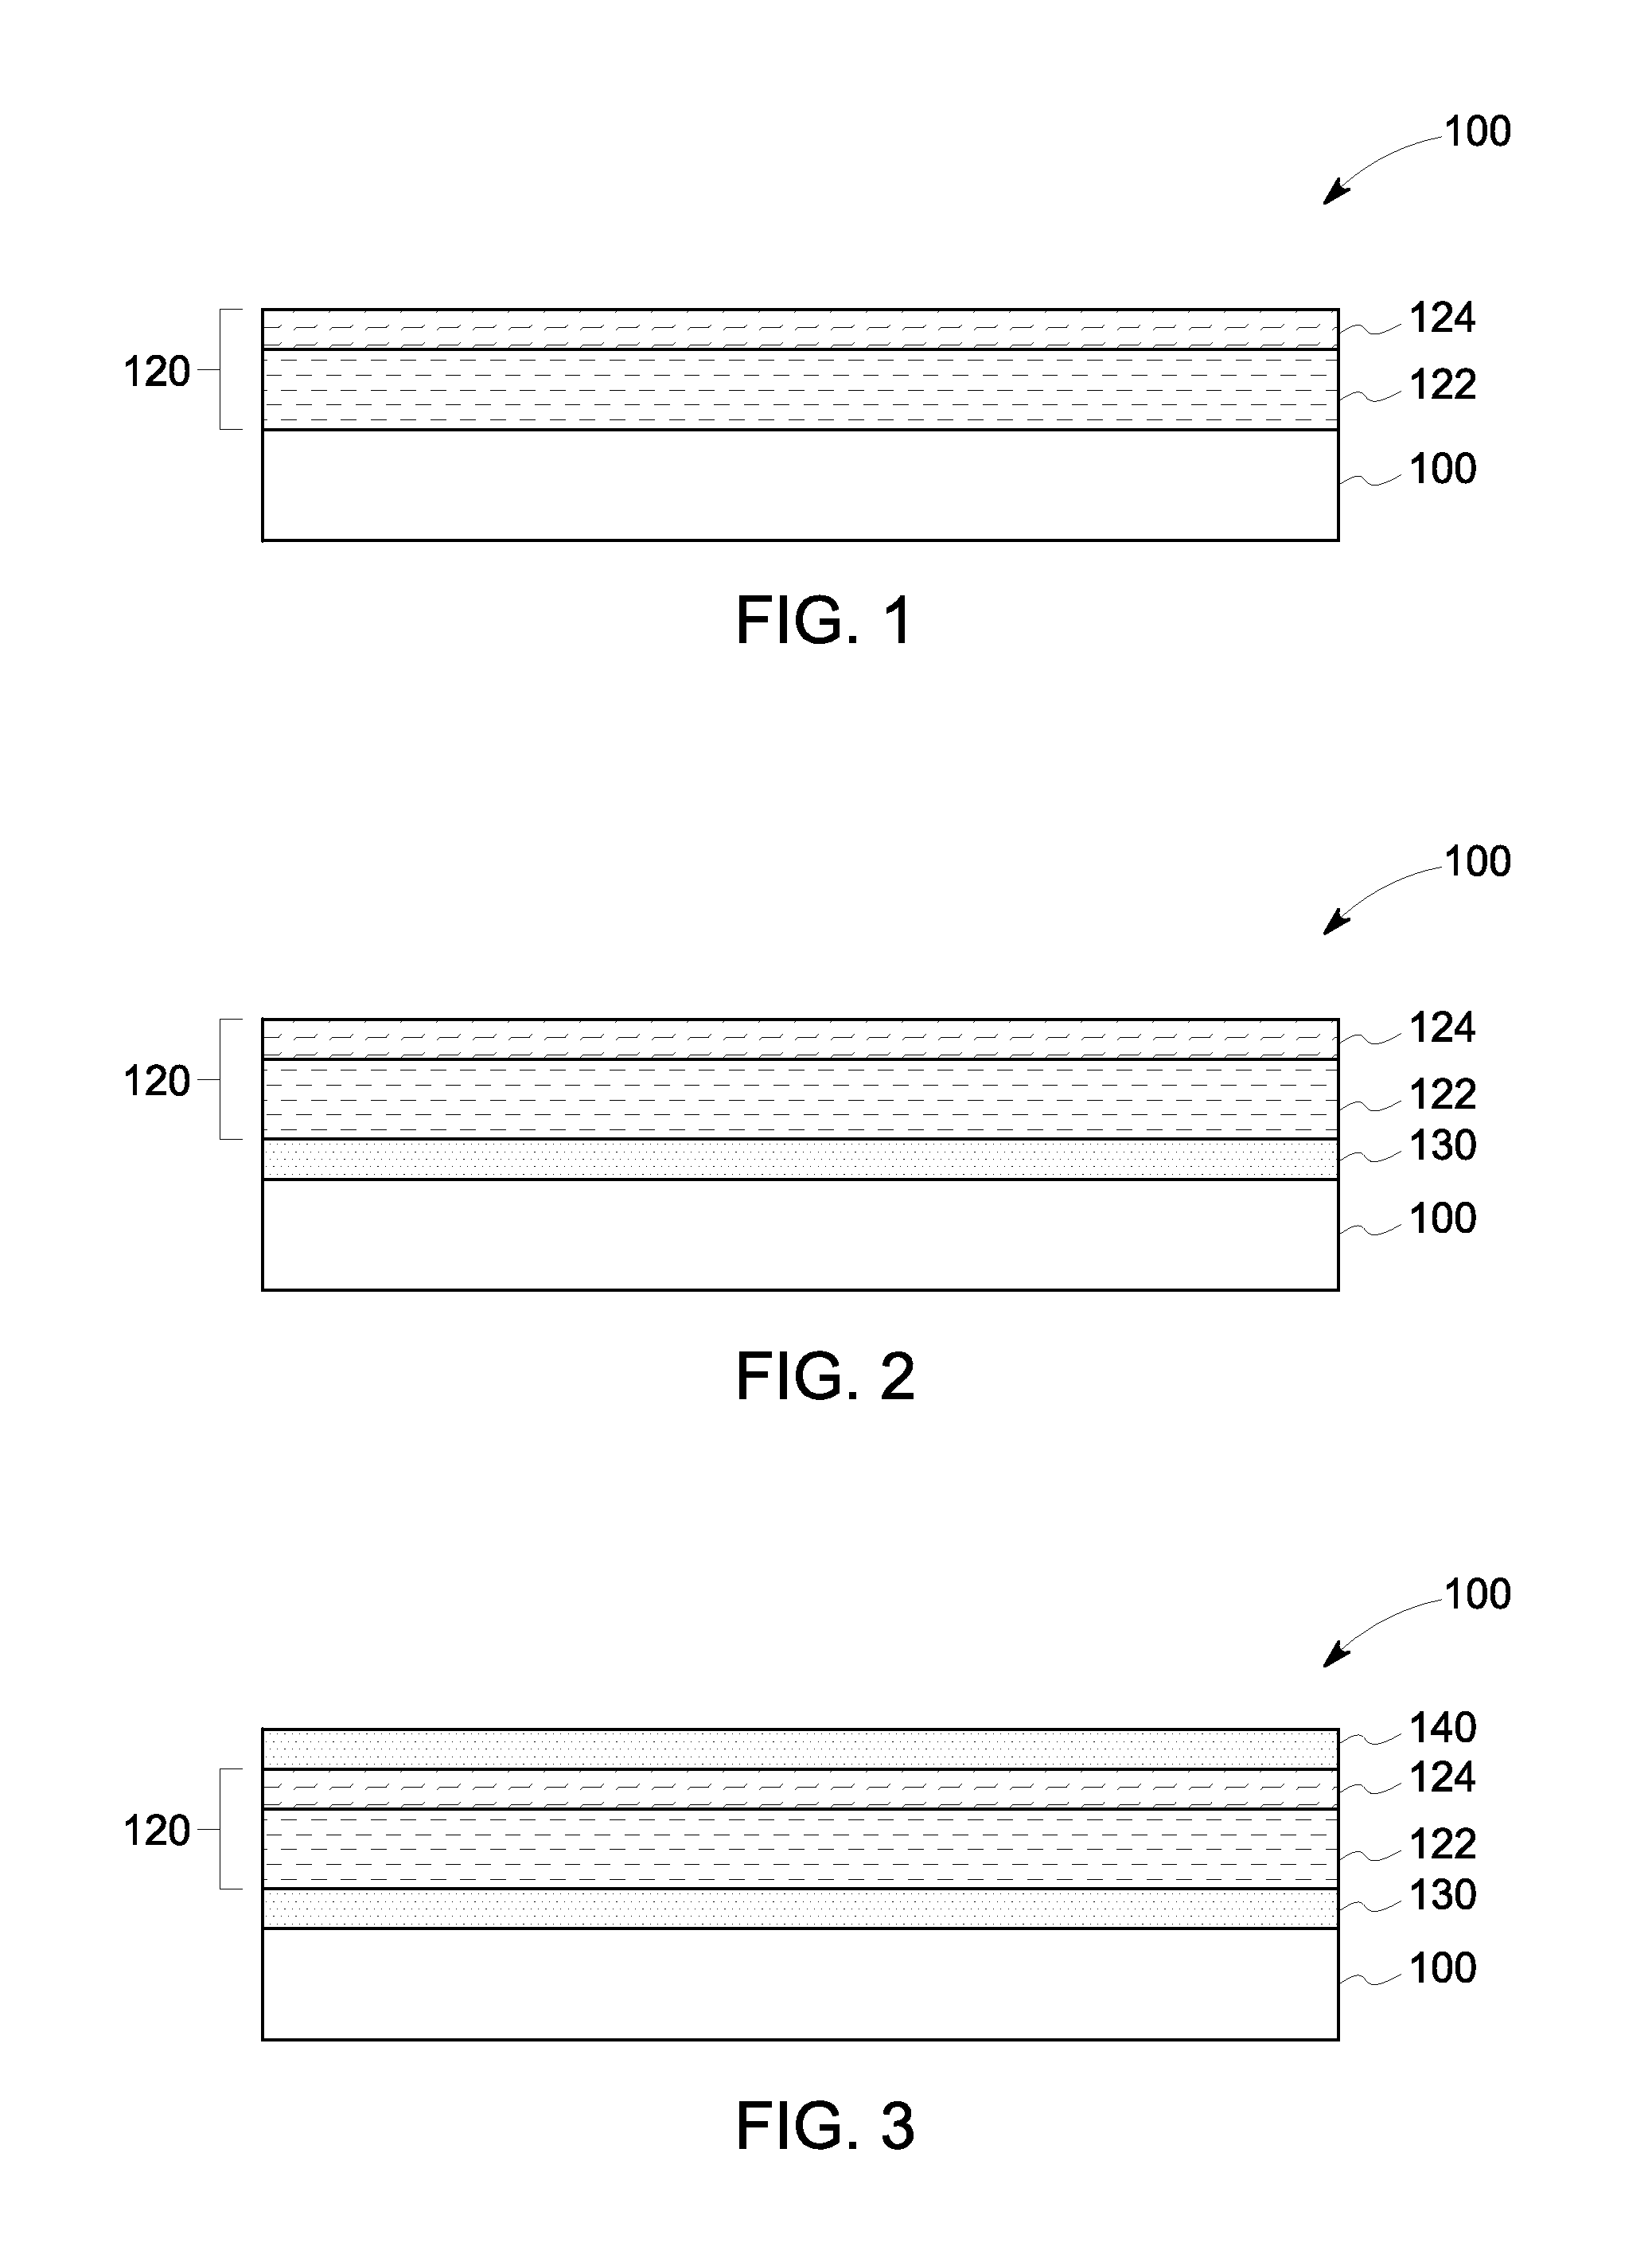 Article and method of making thereof